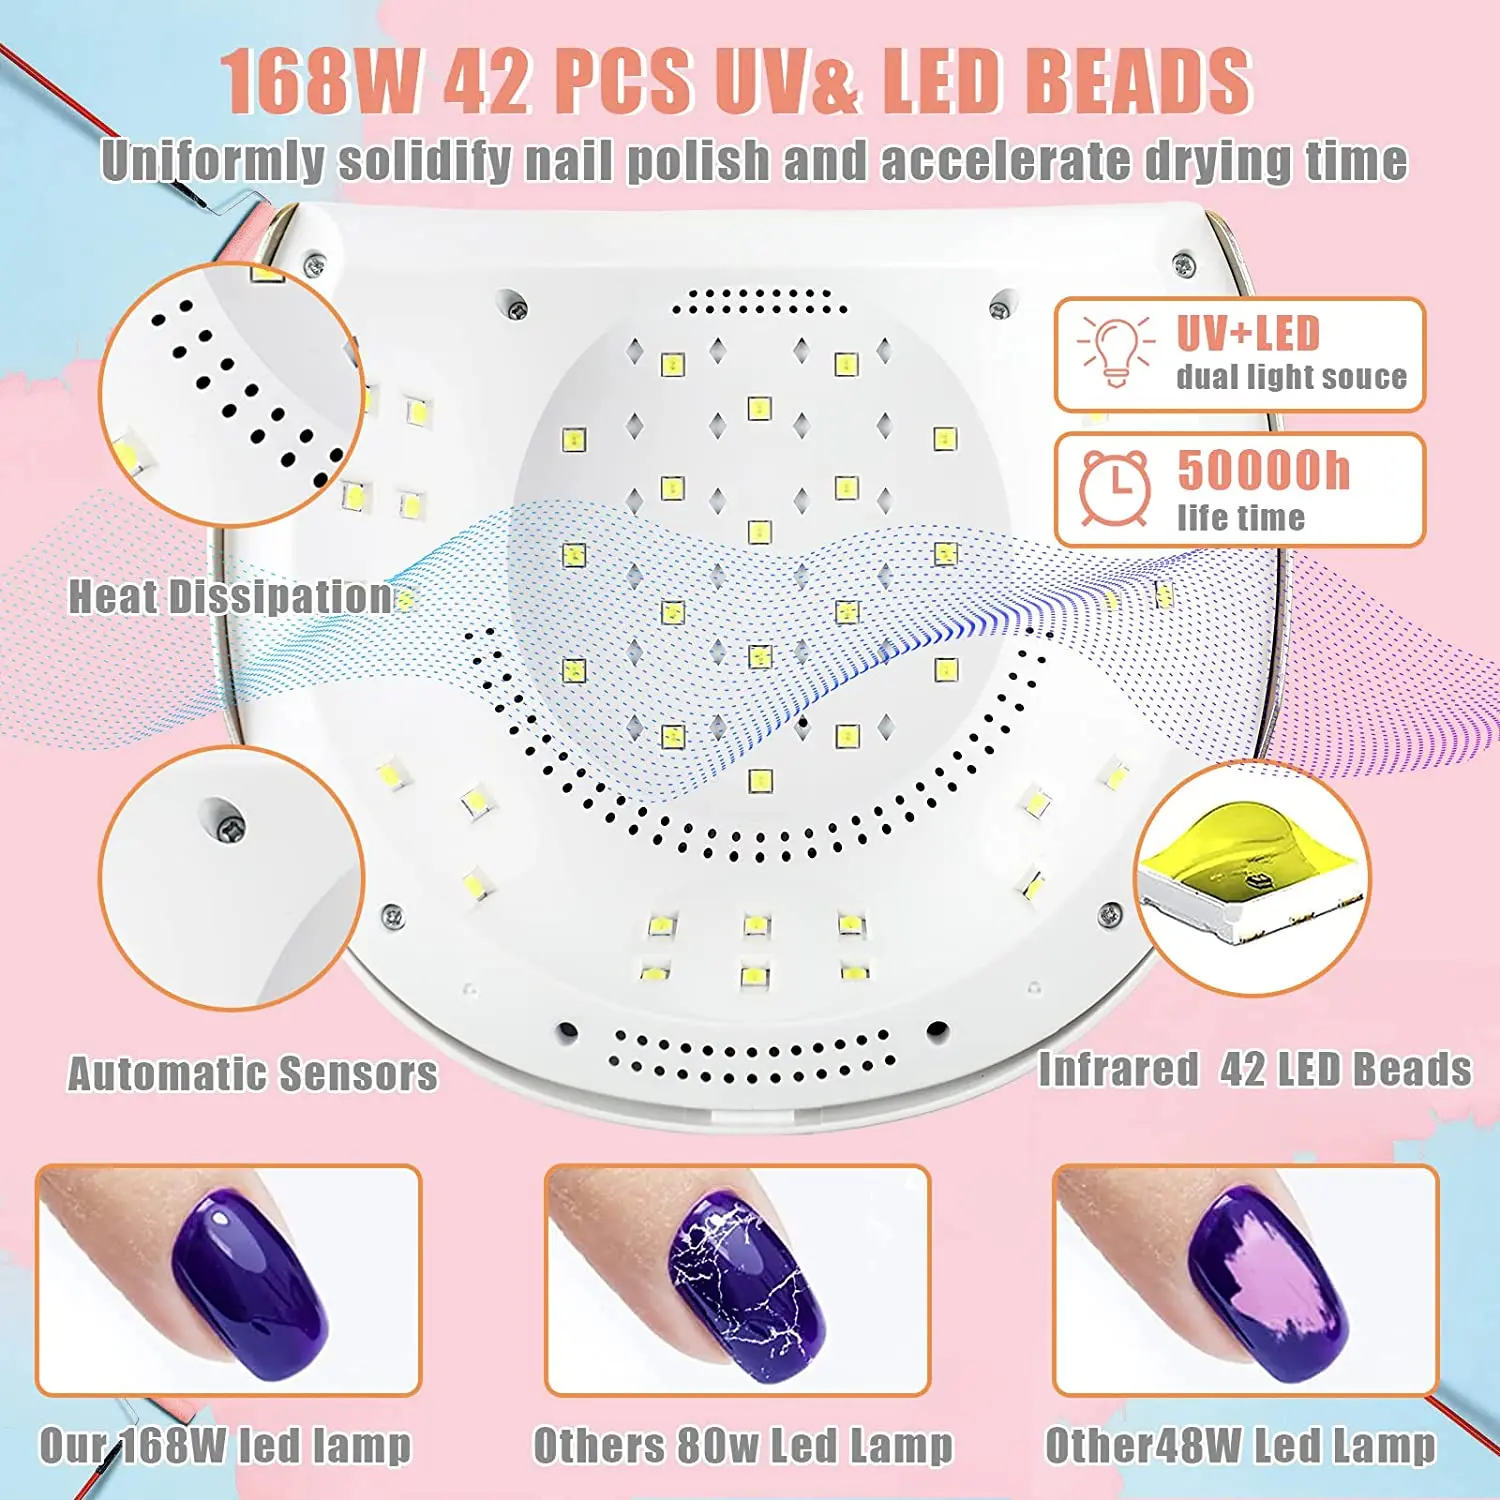 UV LED light, 168W UV light with 4 timer settings, with automatic sensor, portable handle professional dryer for gel oil curing。 enlarge